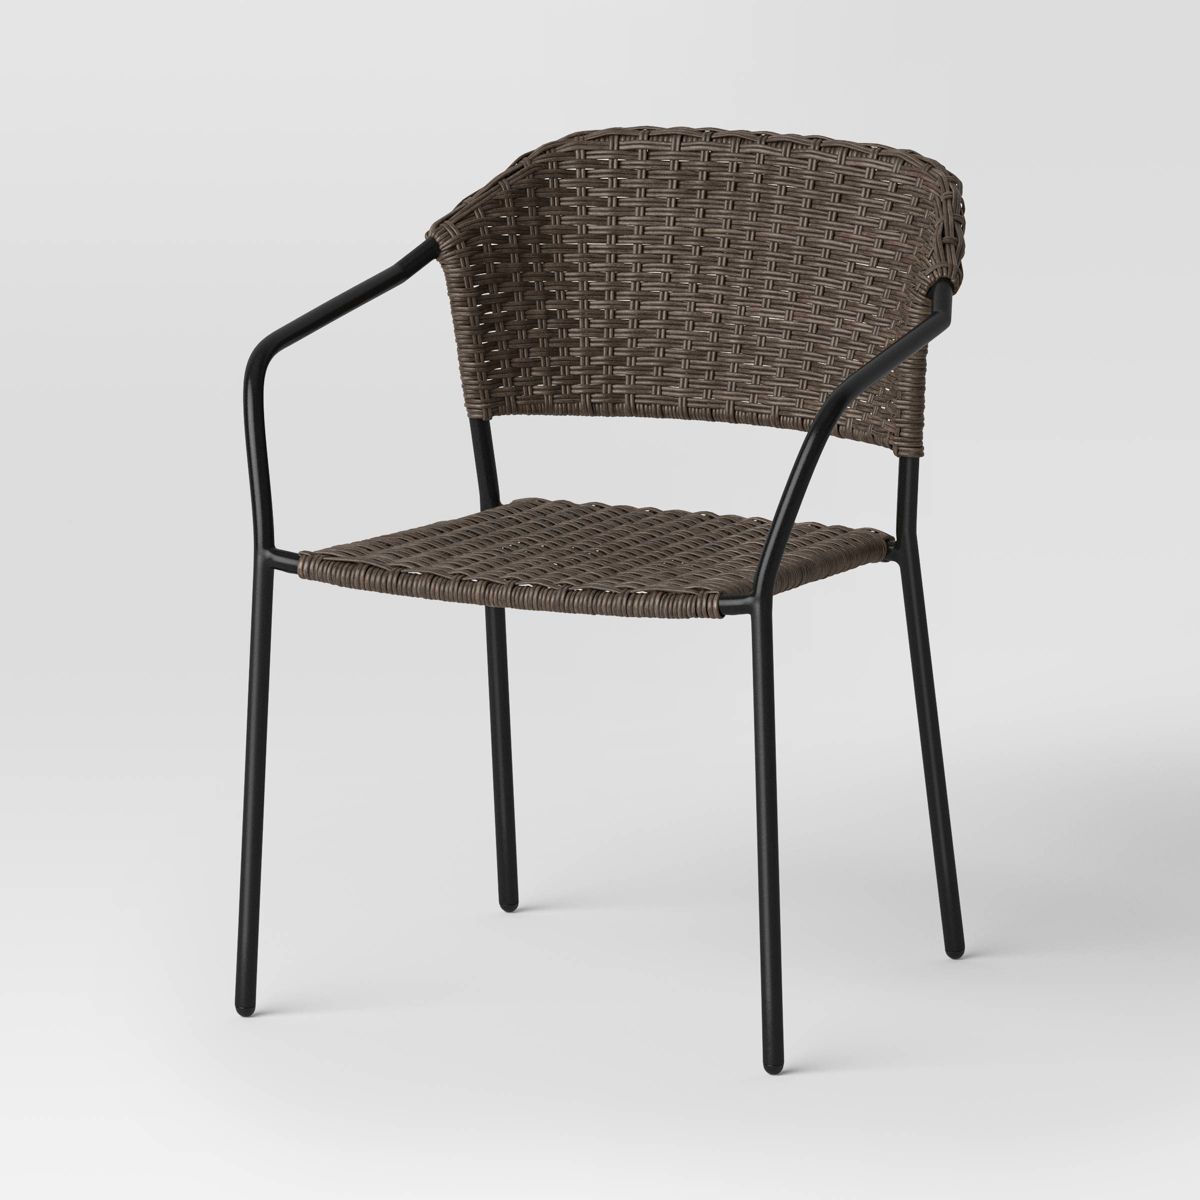 Stack Steel & Wicker Outdoor Patio Chairs, Arm Chairs Black - Room Essentials™ | Target